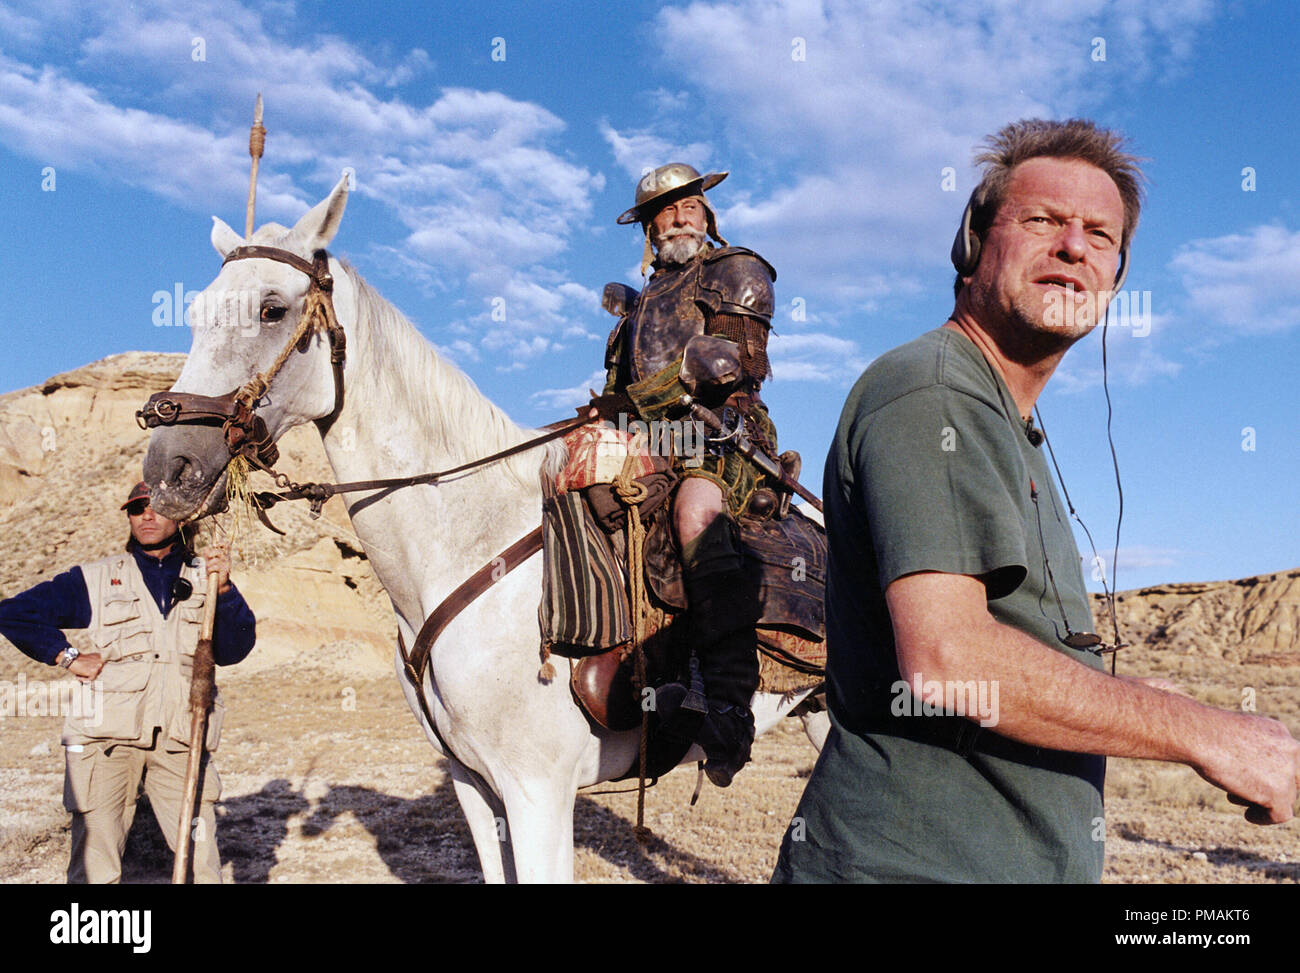 Jean Rochefort, Director Terry Gilliam, 'Lost In La Mancha' (2002) Quixote Films  File Reference # 33300 698THA  For Editorial Use Only -  All Rights Reserved Stock Photo